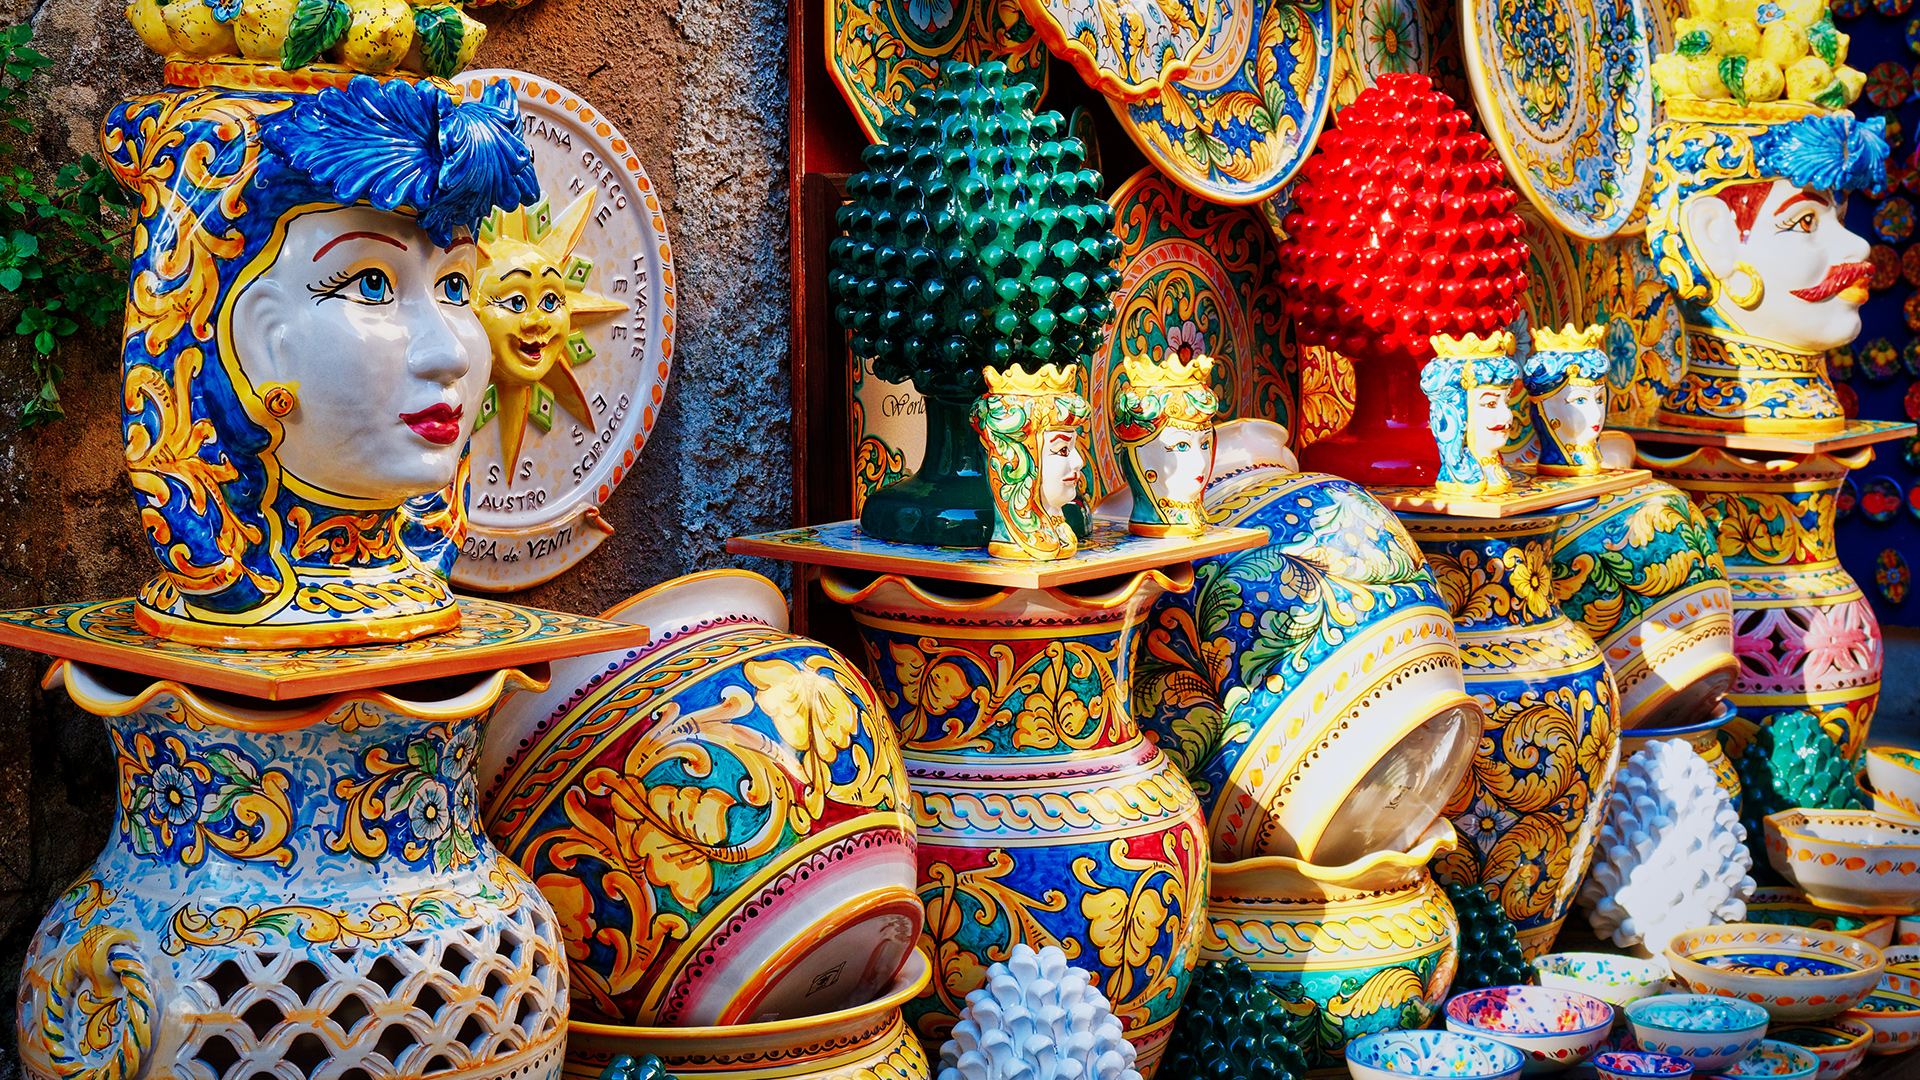 Colorful Maiolica pottery on display